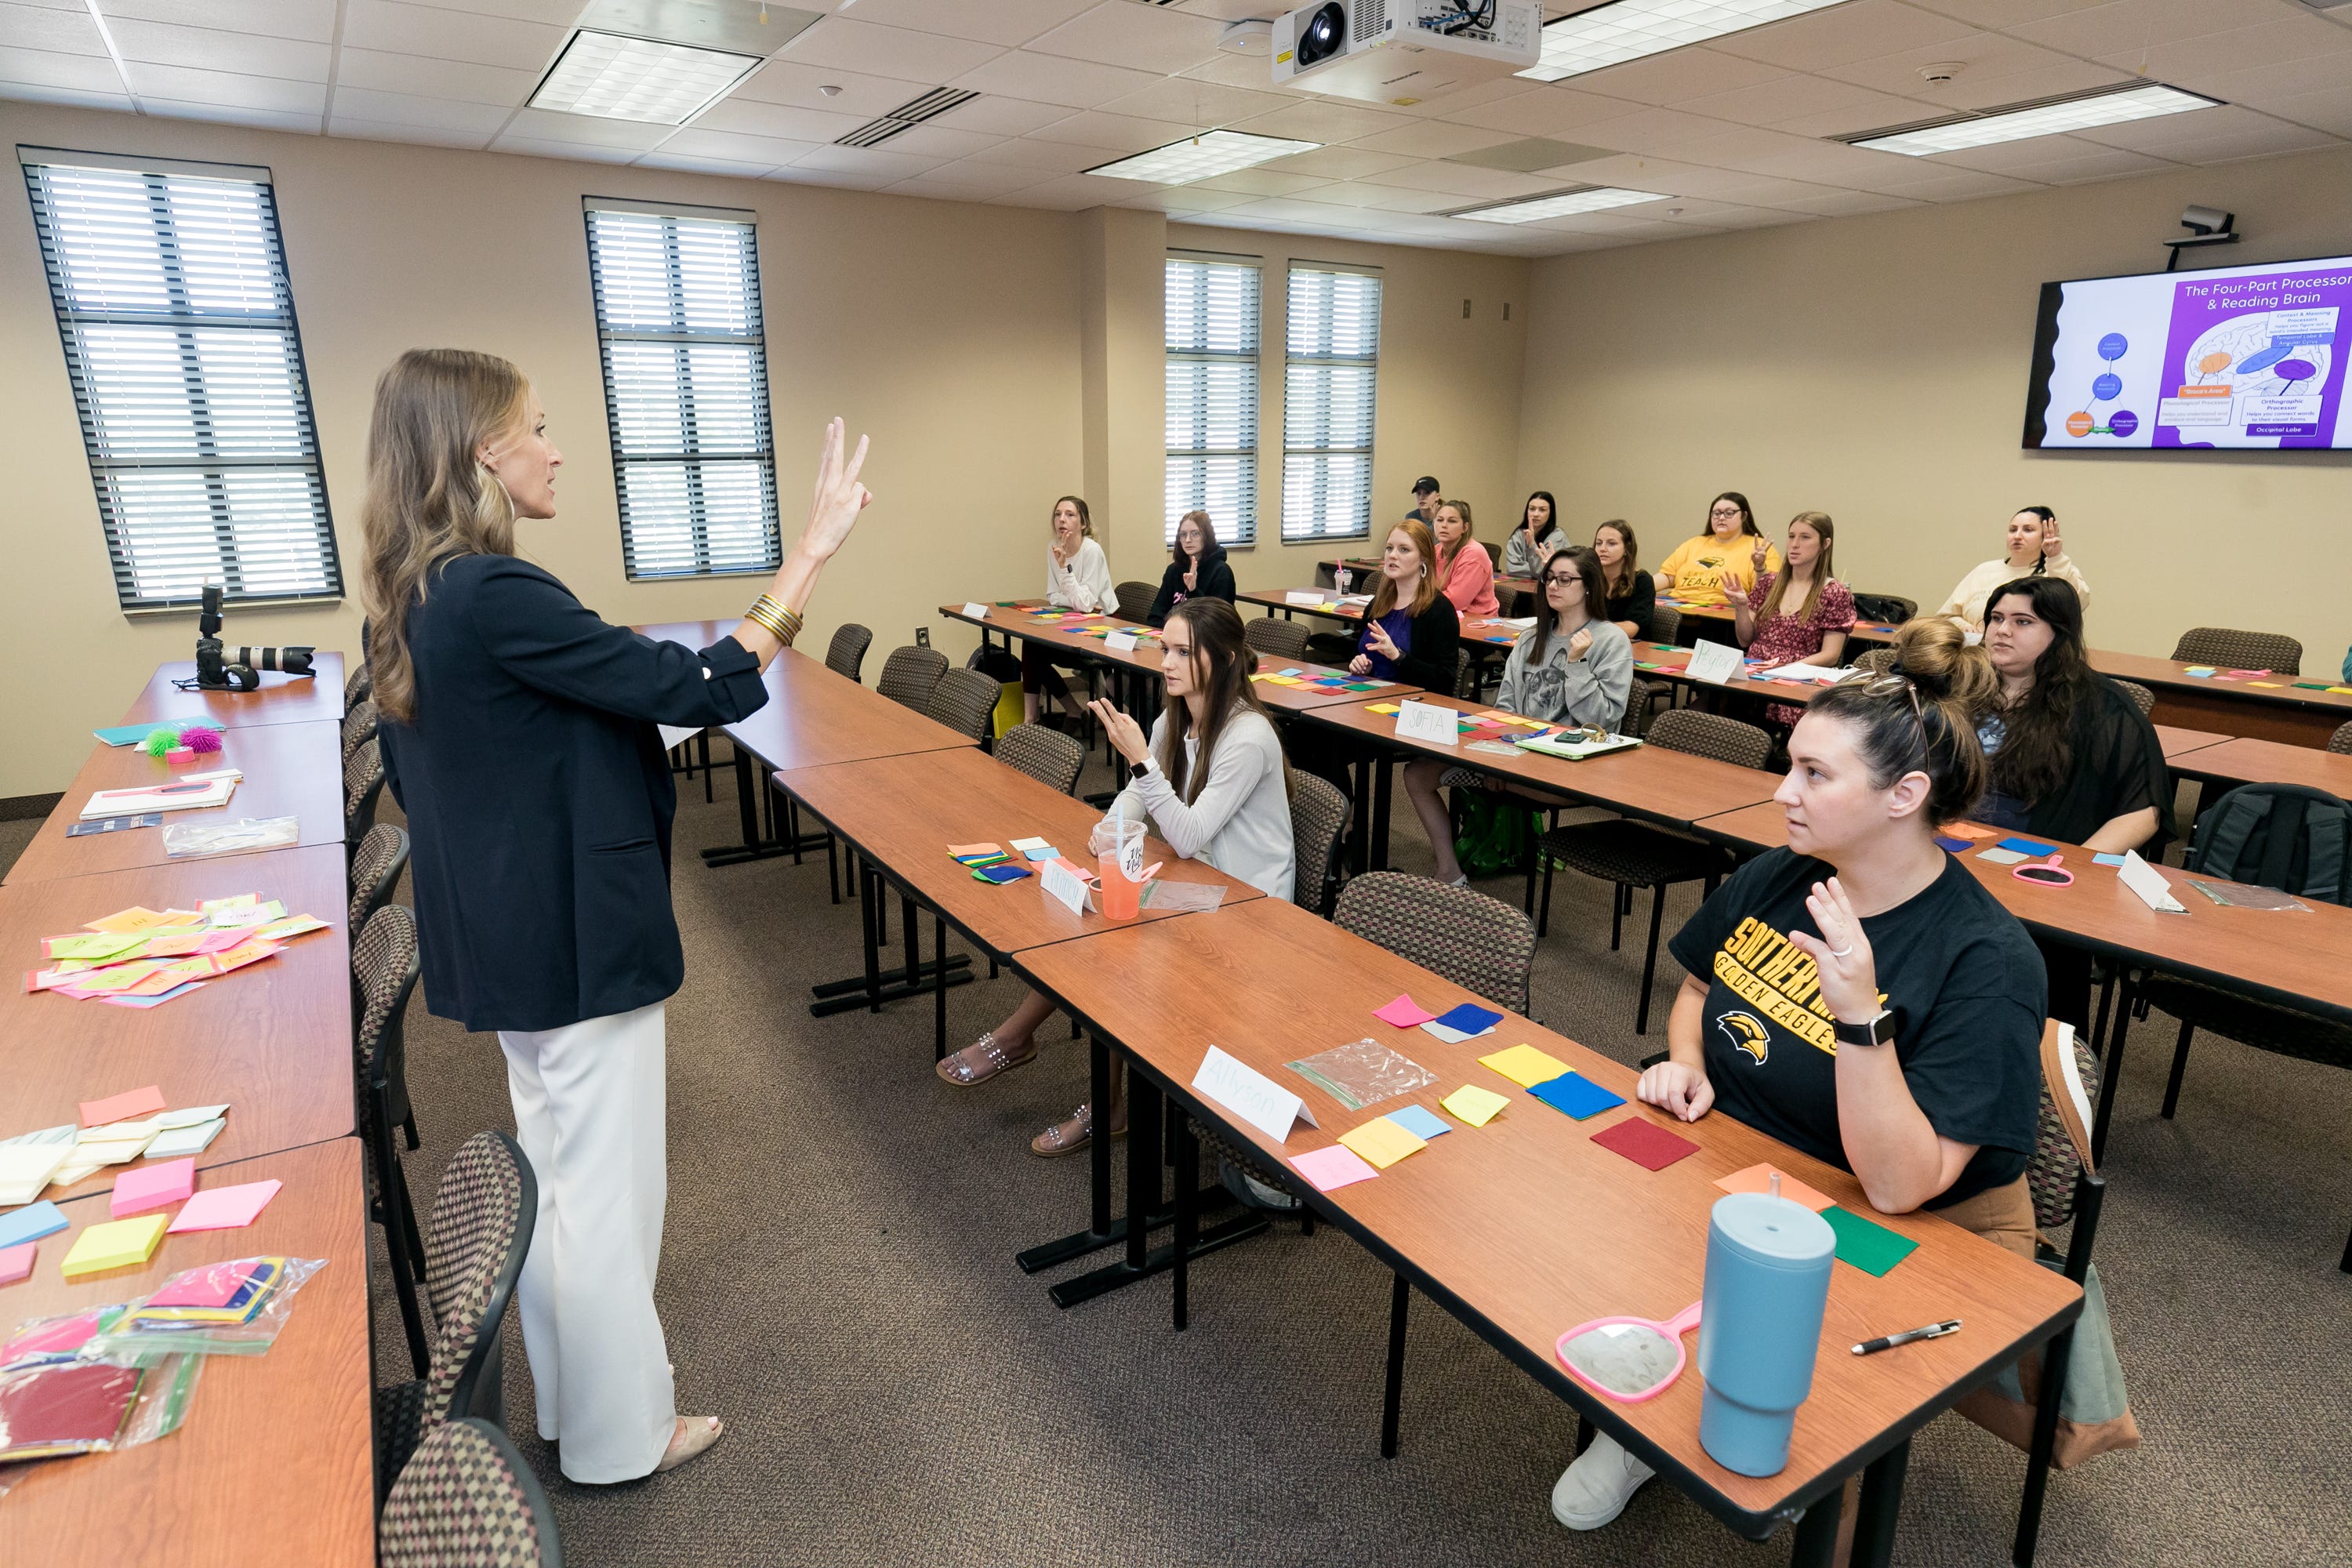 University of Southern Mississippi Gulf Park Campus Associate Teaching Professor Billie Tingle educates future teachers on lessons in reading in Long Beach, Mississippi, on Sept. 14, 2022.